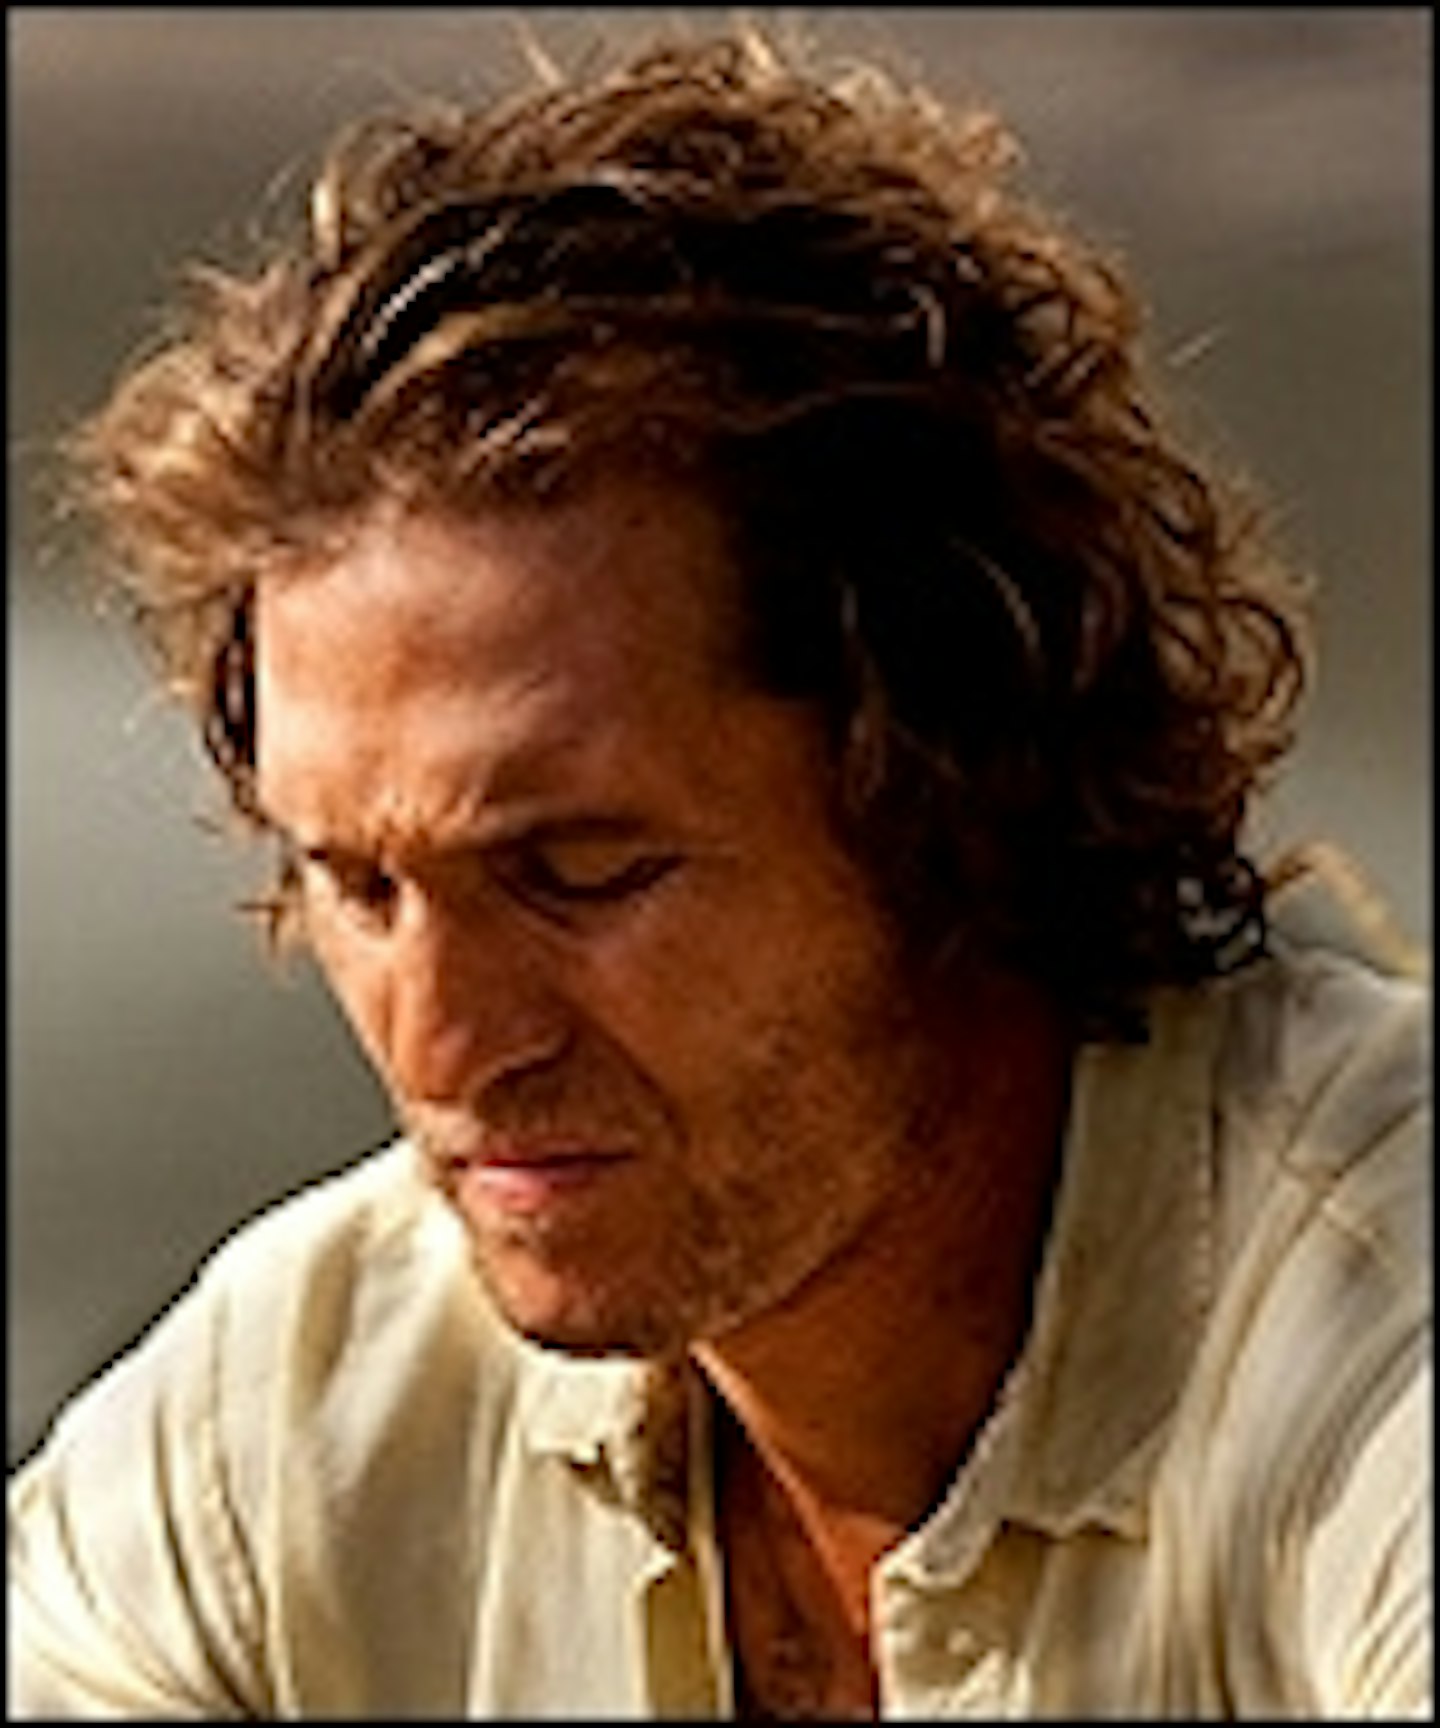 First Look At McConaughey's Mud